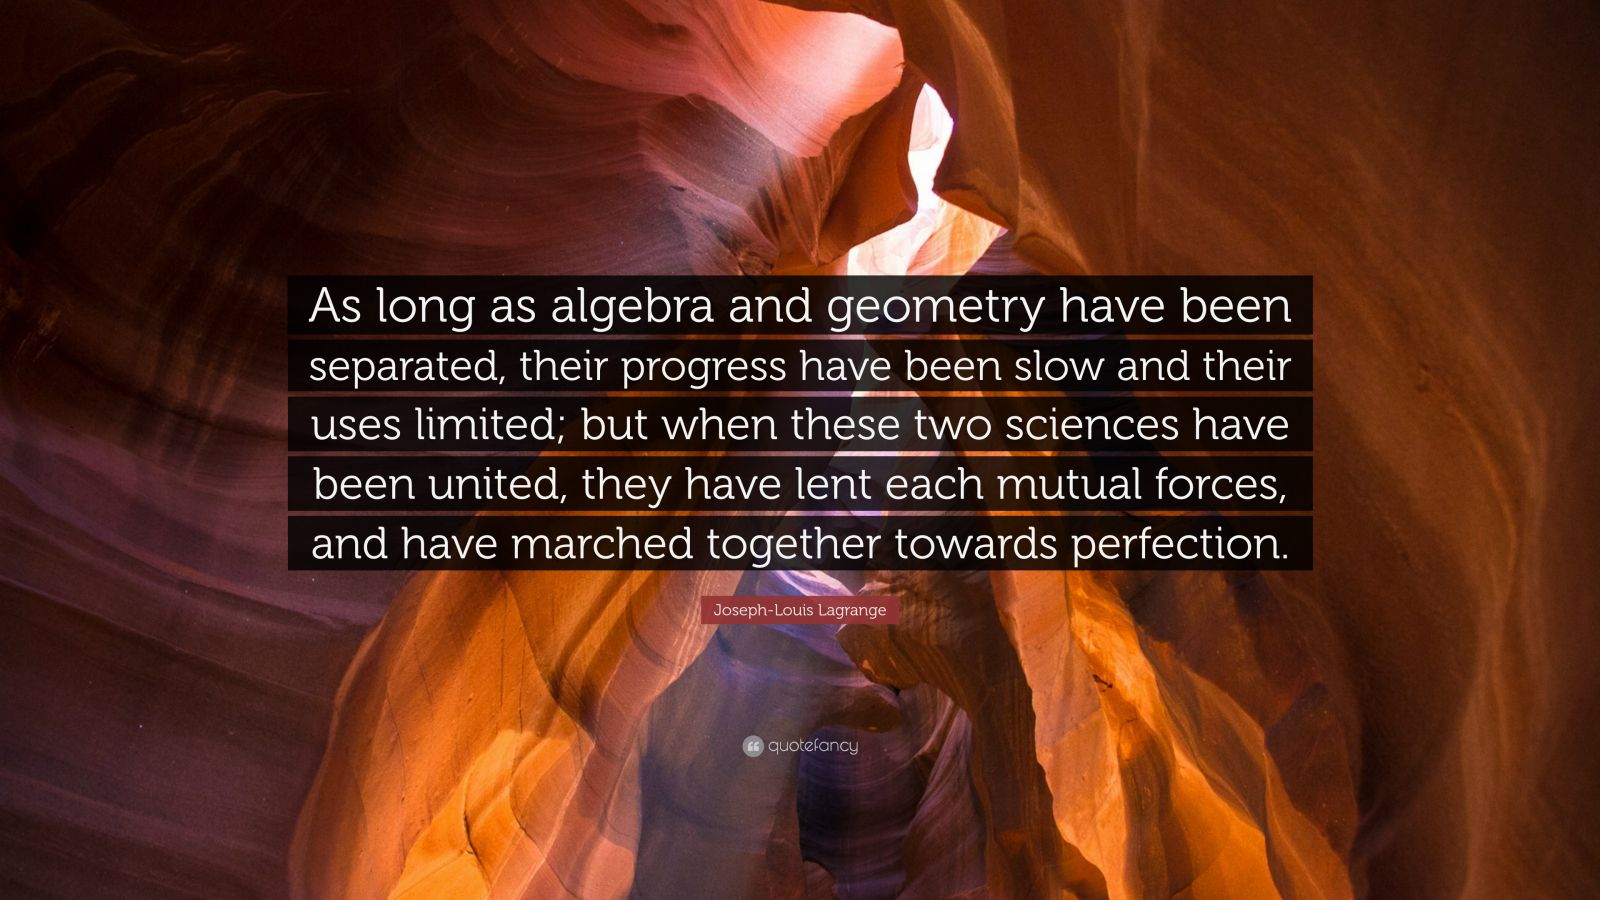 Joseph-Louis Lagrange Quote: “As long as algebra and geometry have been separated, their ...